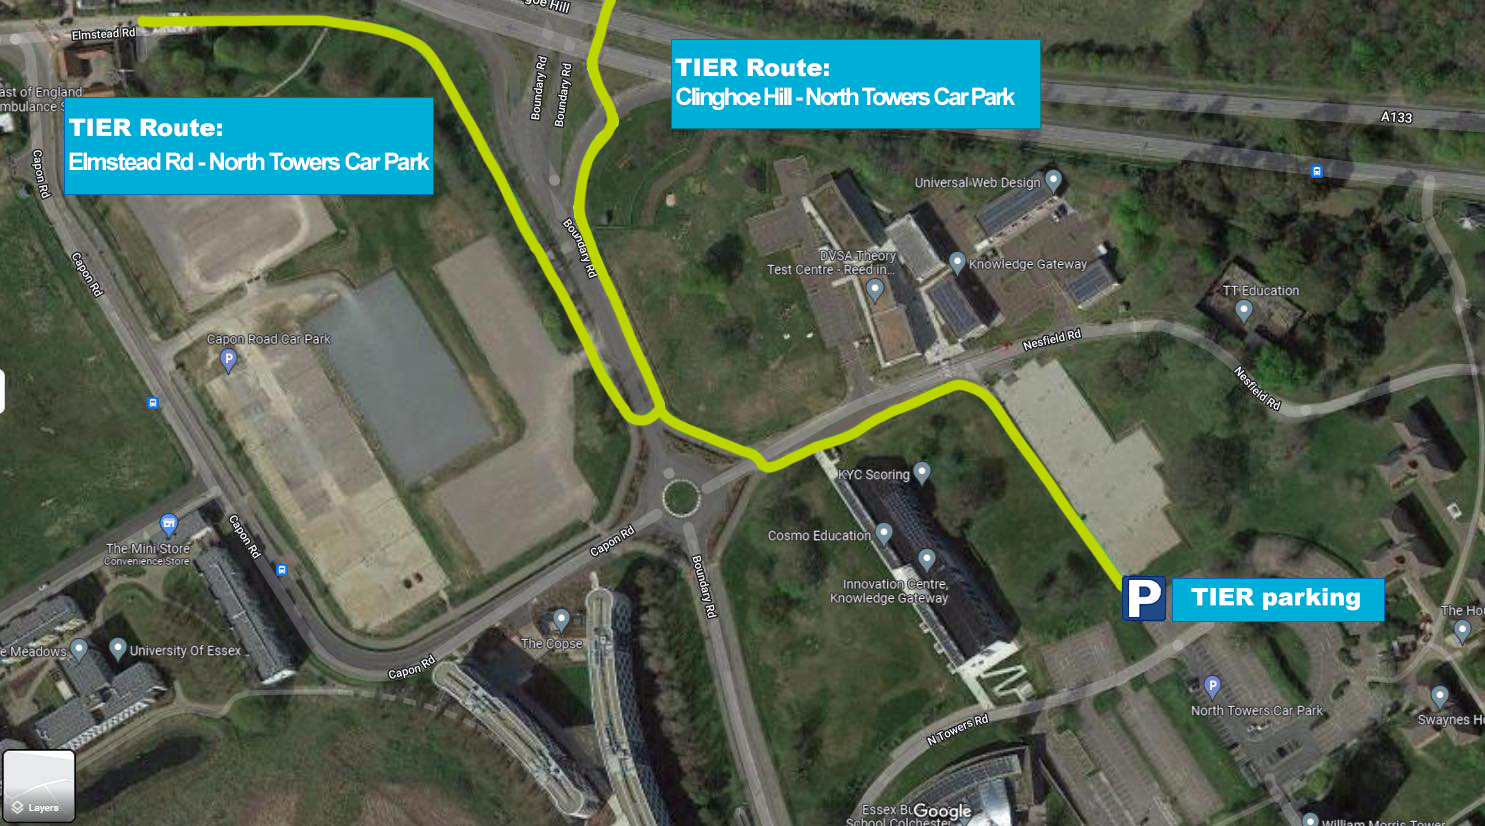 An aerial map showing the routes for TIER e-scooters from Elmstead Road and Clingoe Hill meeting on Boundary Road, then heading up Nesfield Road from the roundabout before reaching the North Towers car park.